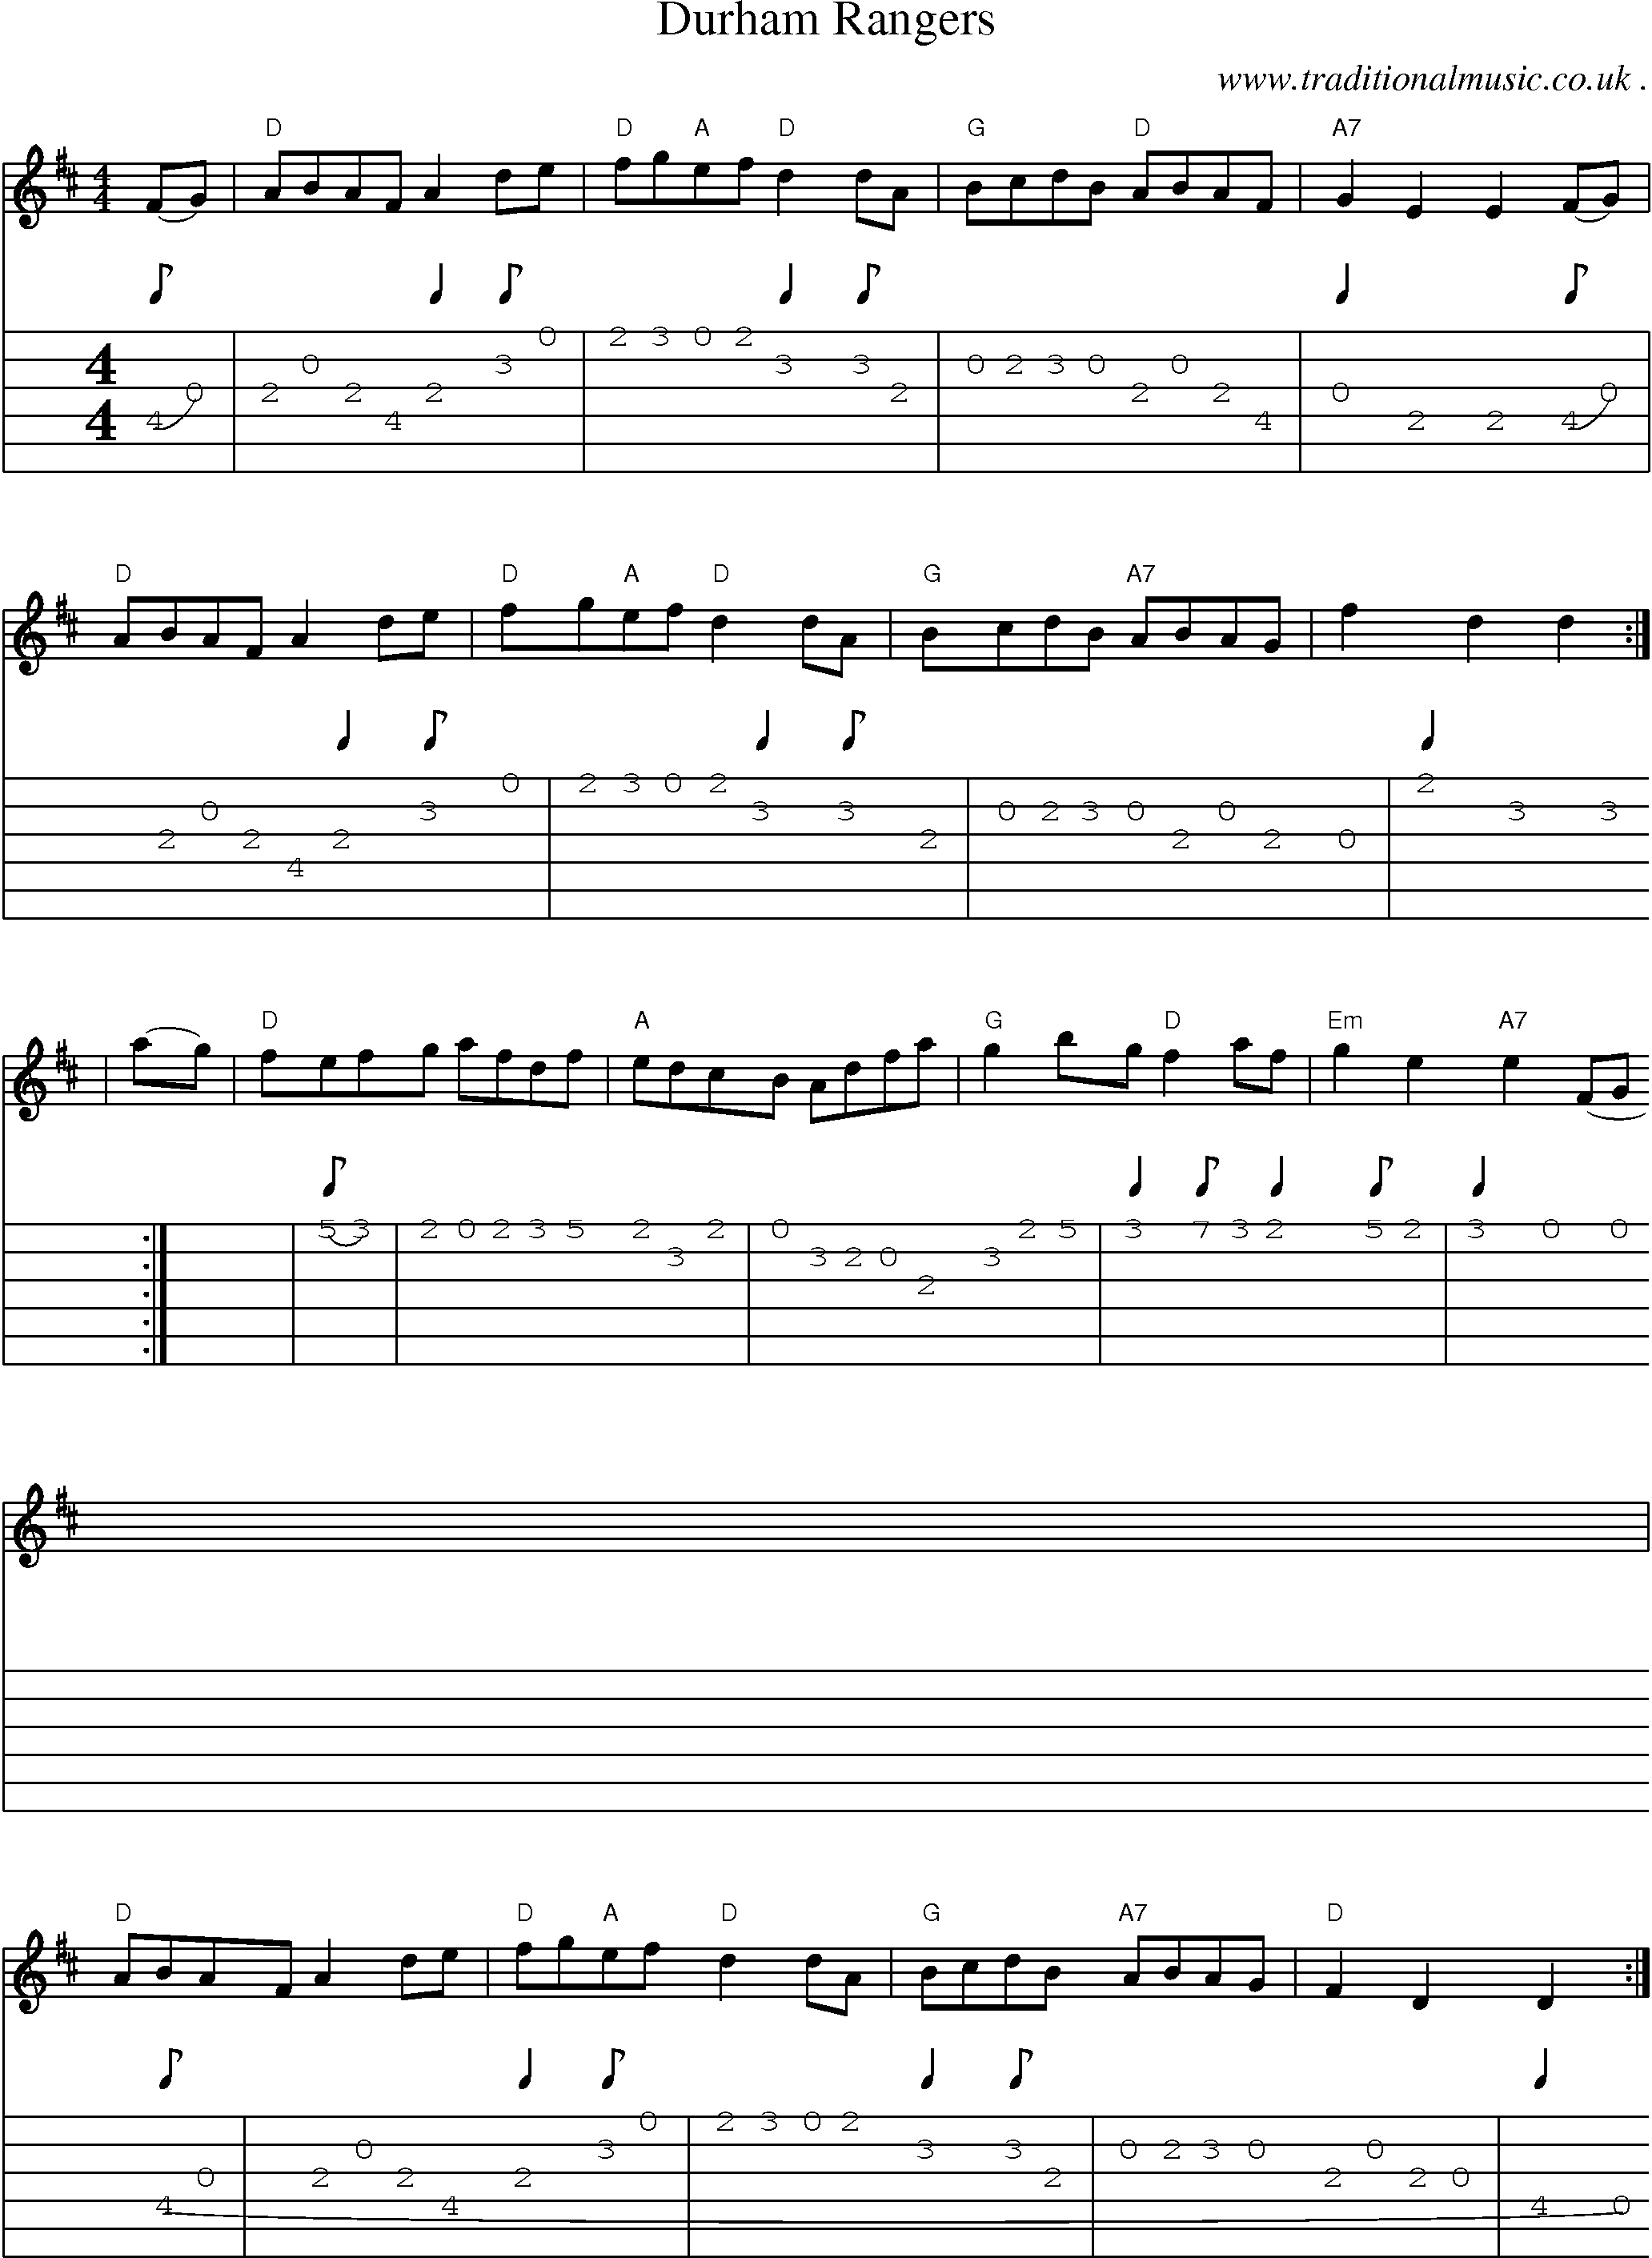 Sheet-music  score, Chords and Guitar Tabs for Durham Rangers